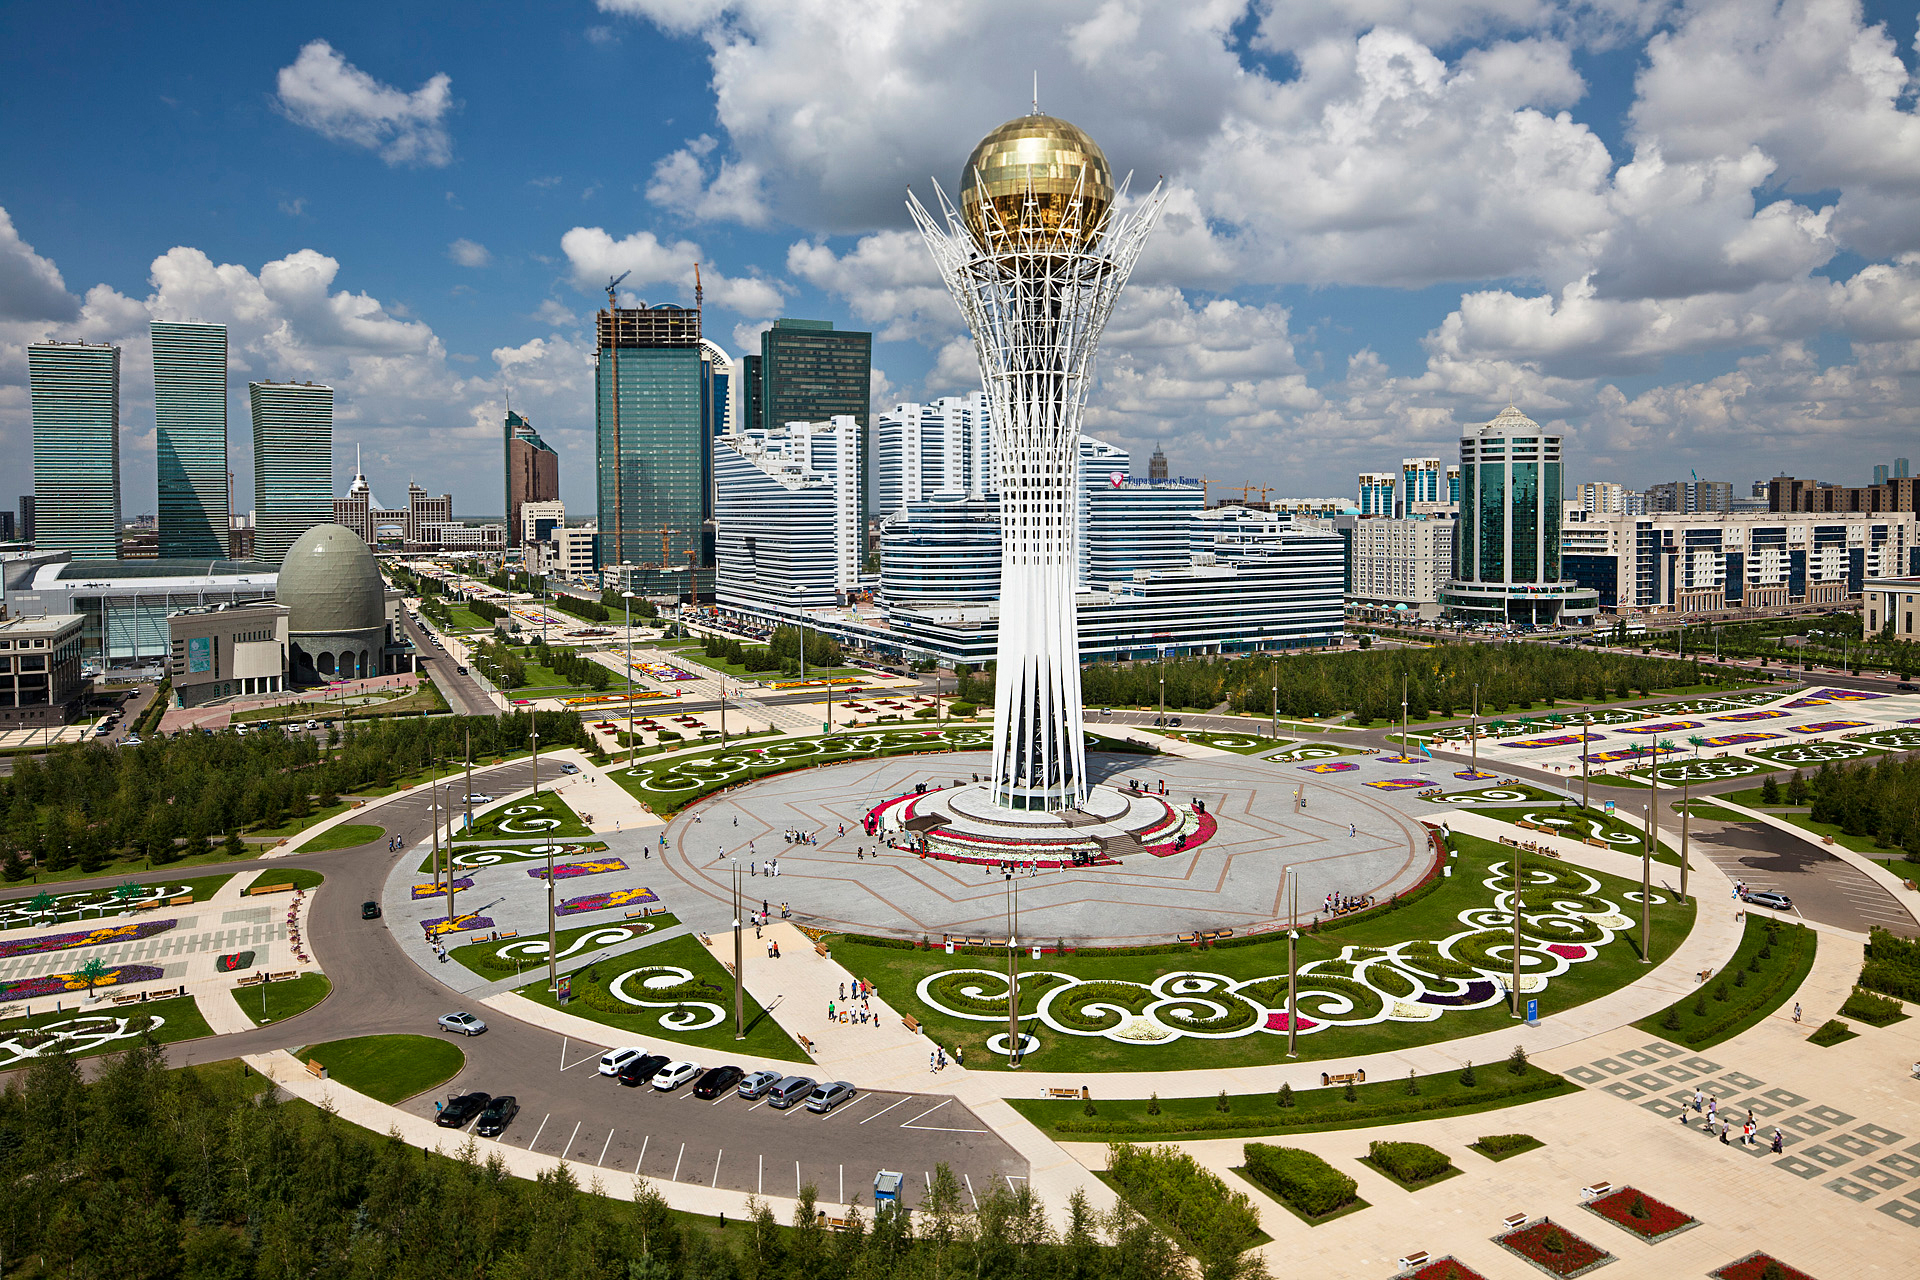  The Baiterek, towers over Astana's central promenade. Intended as a symbol of the new capital, the 318-foot monument evokes a giant tree with a golden egg in its branches. in the Kazakh myth of Samruk, a sacred bird lays a golden egg in the branches